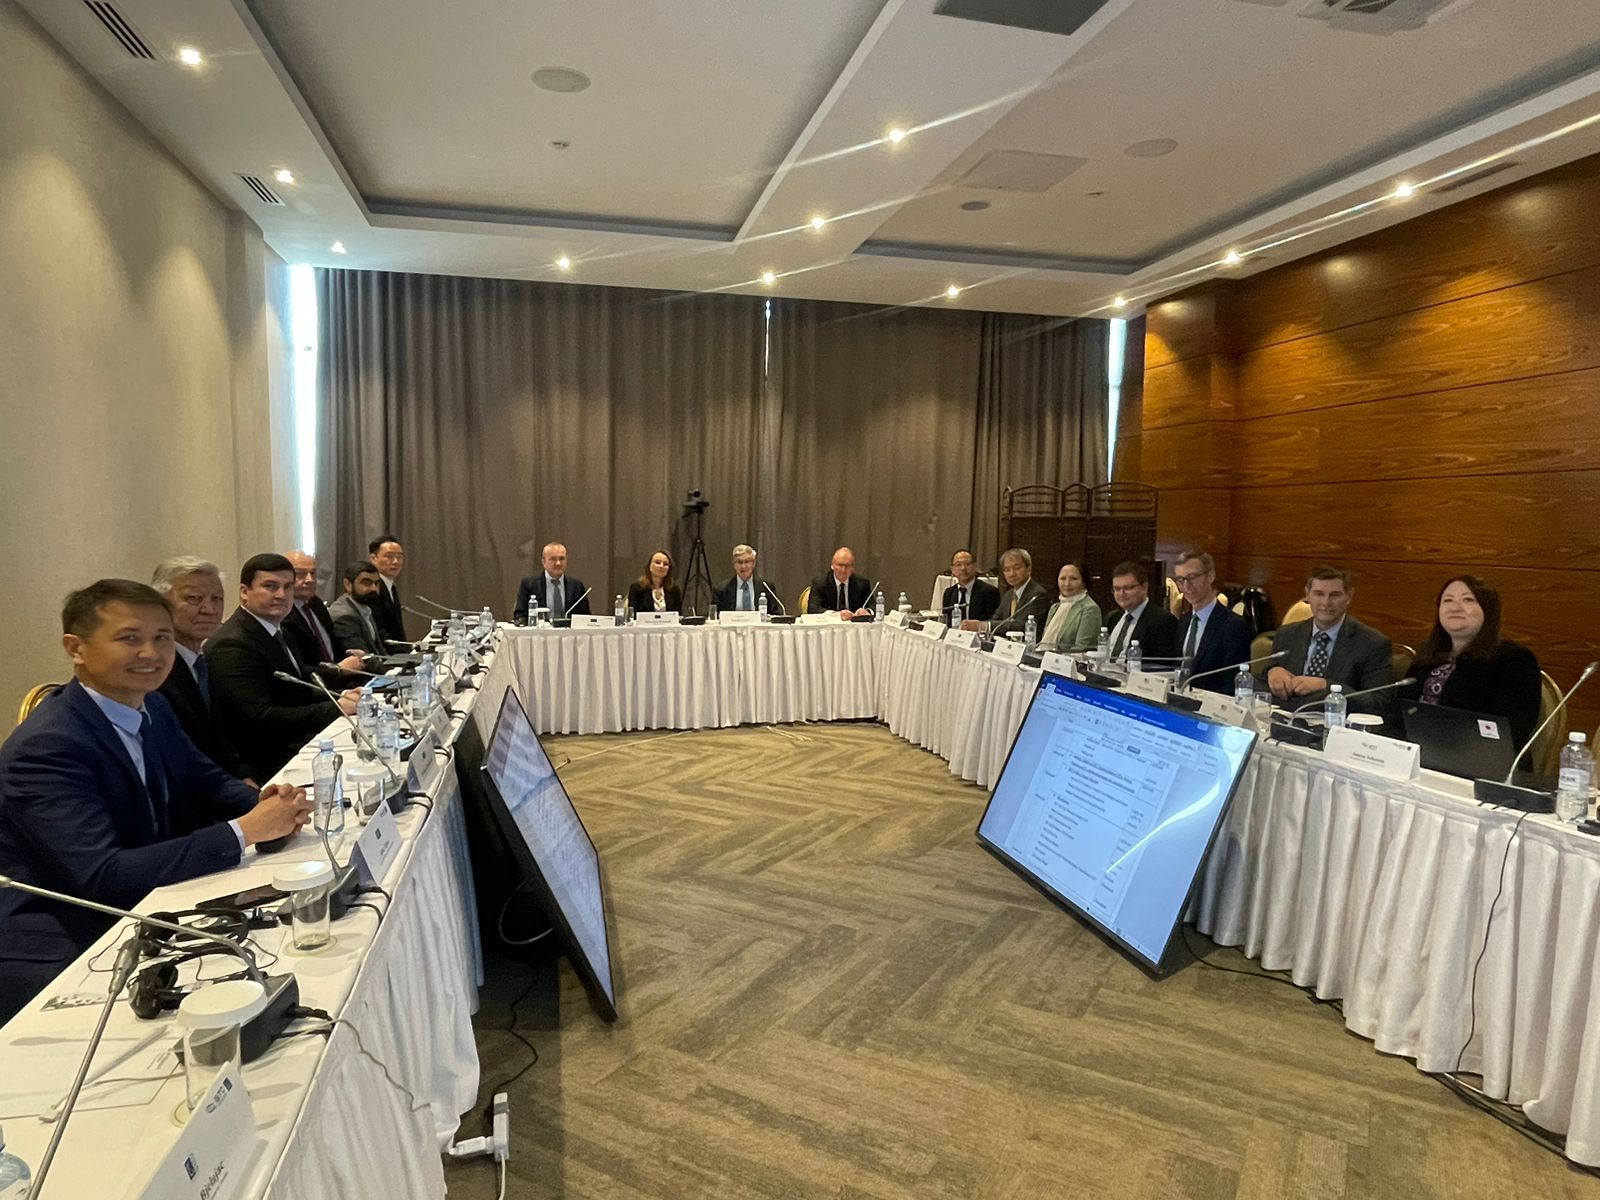 ISTC 78th Governing Board Meeting in Astana, Kazakhstan